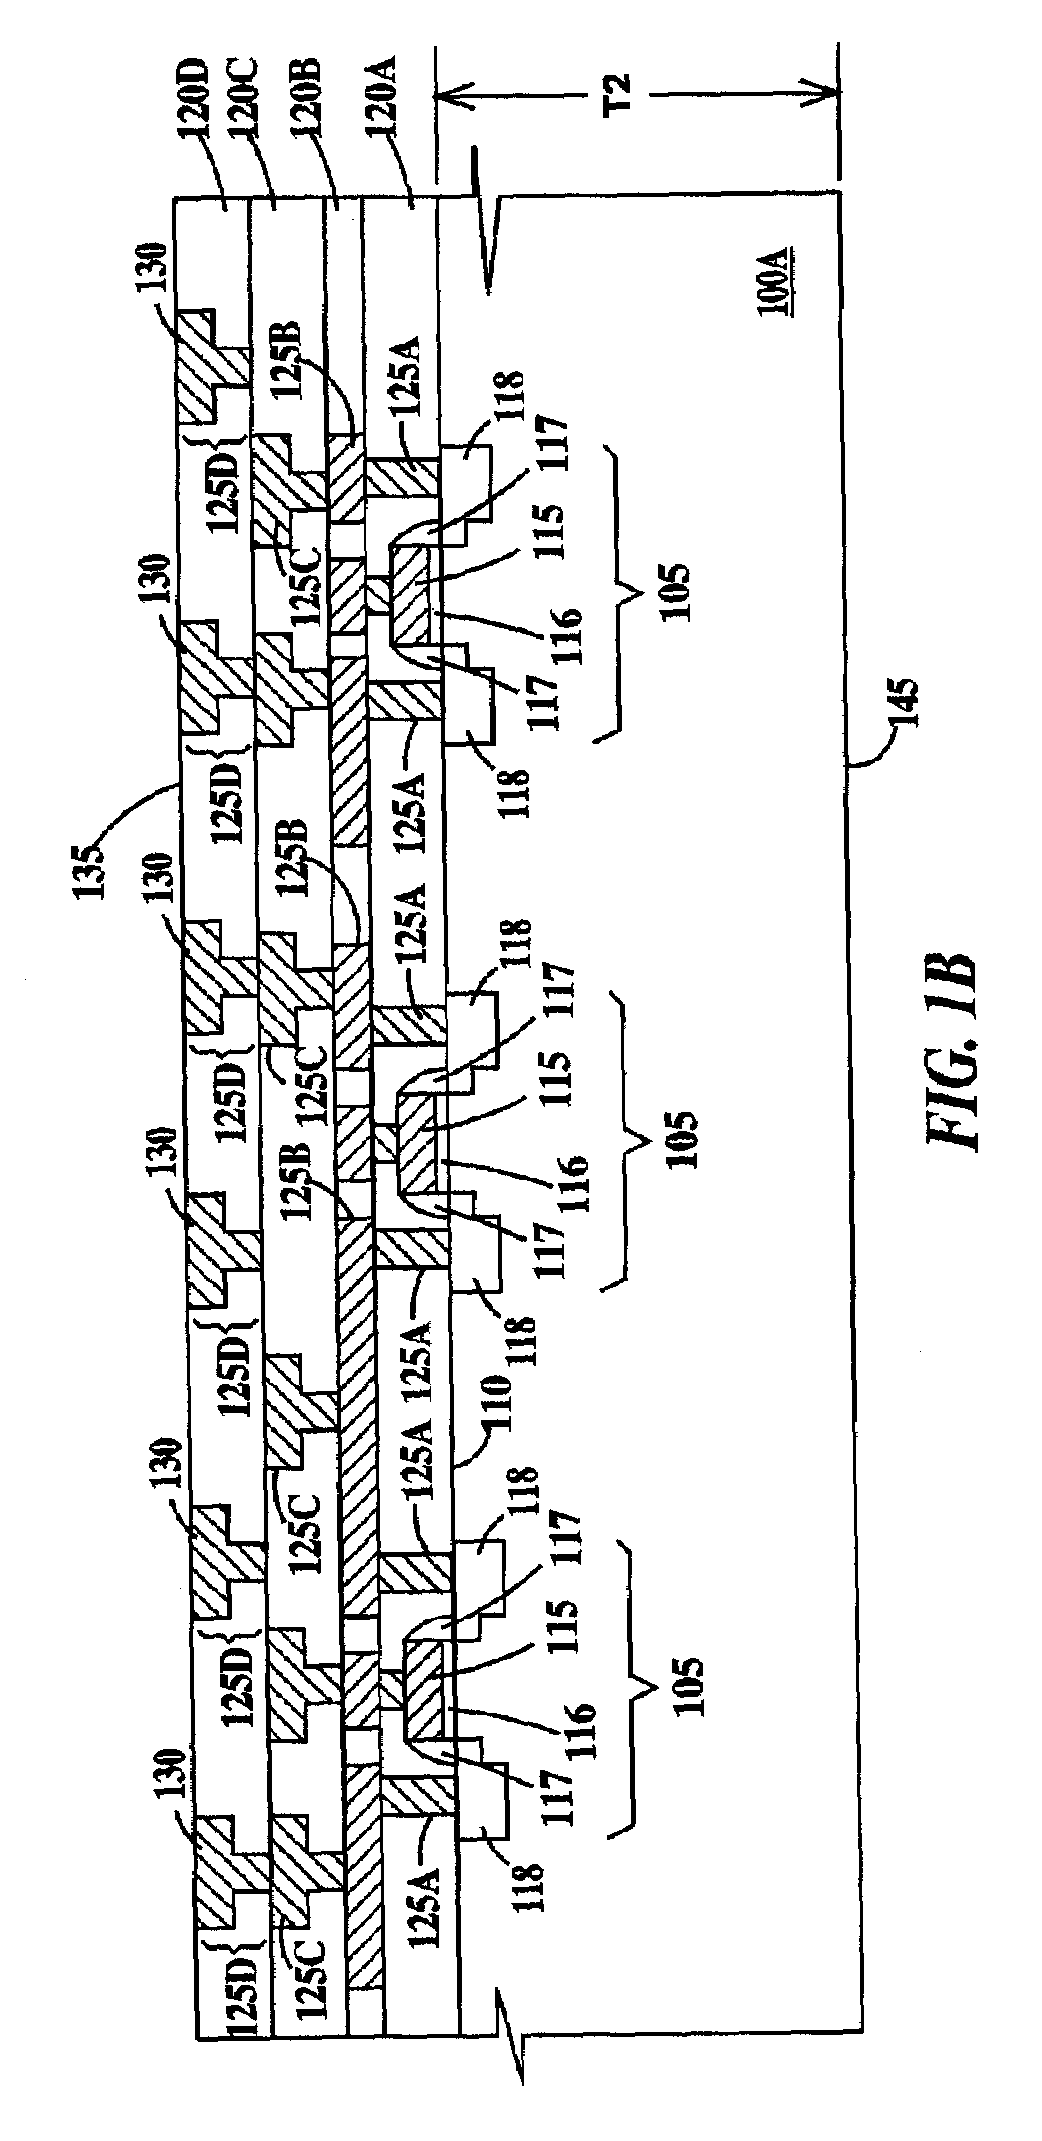 Method for forming interconnects on thin wafers